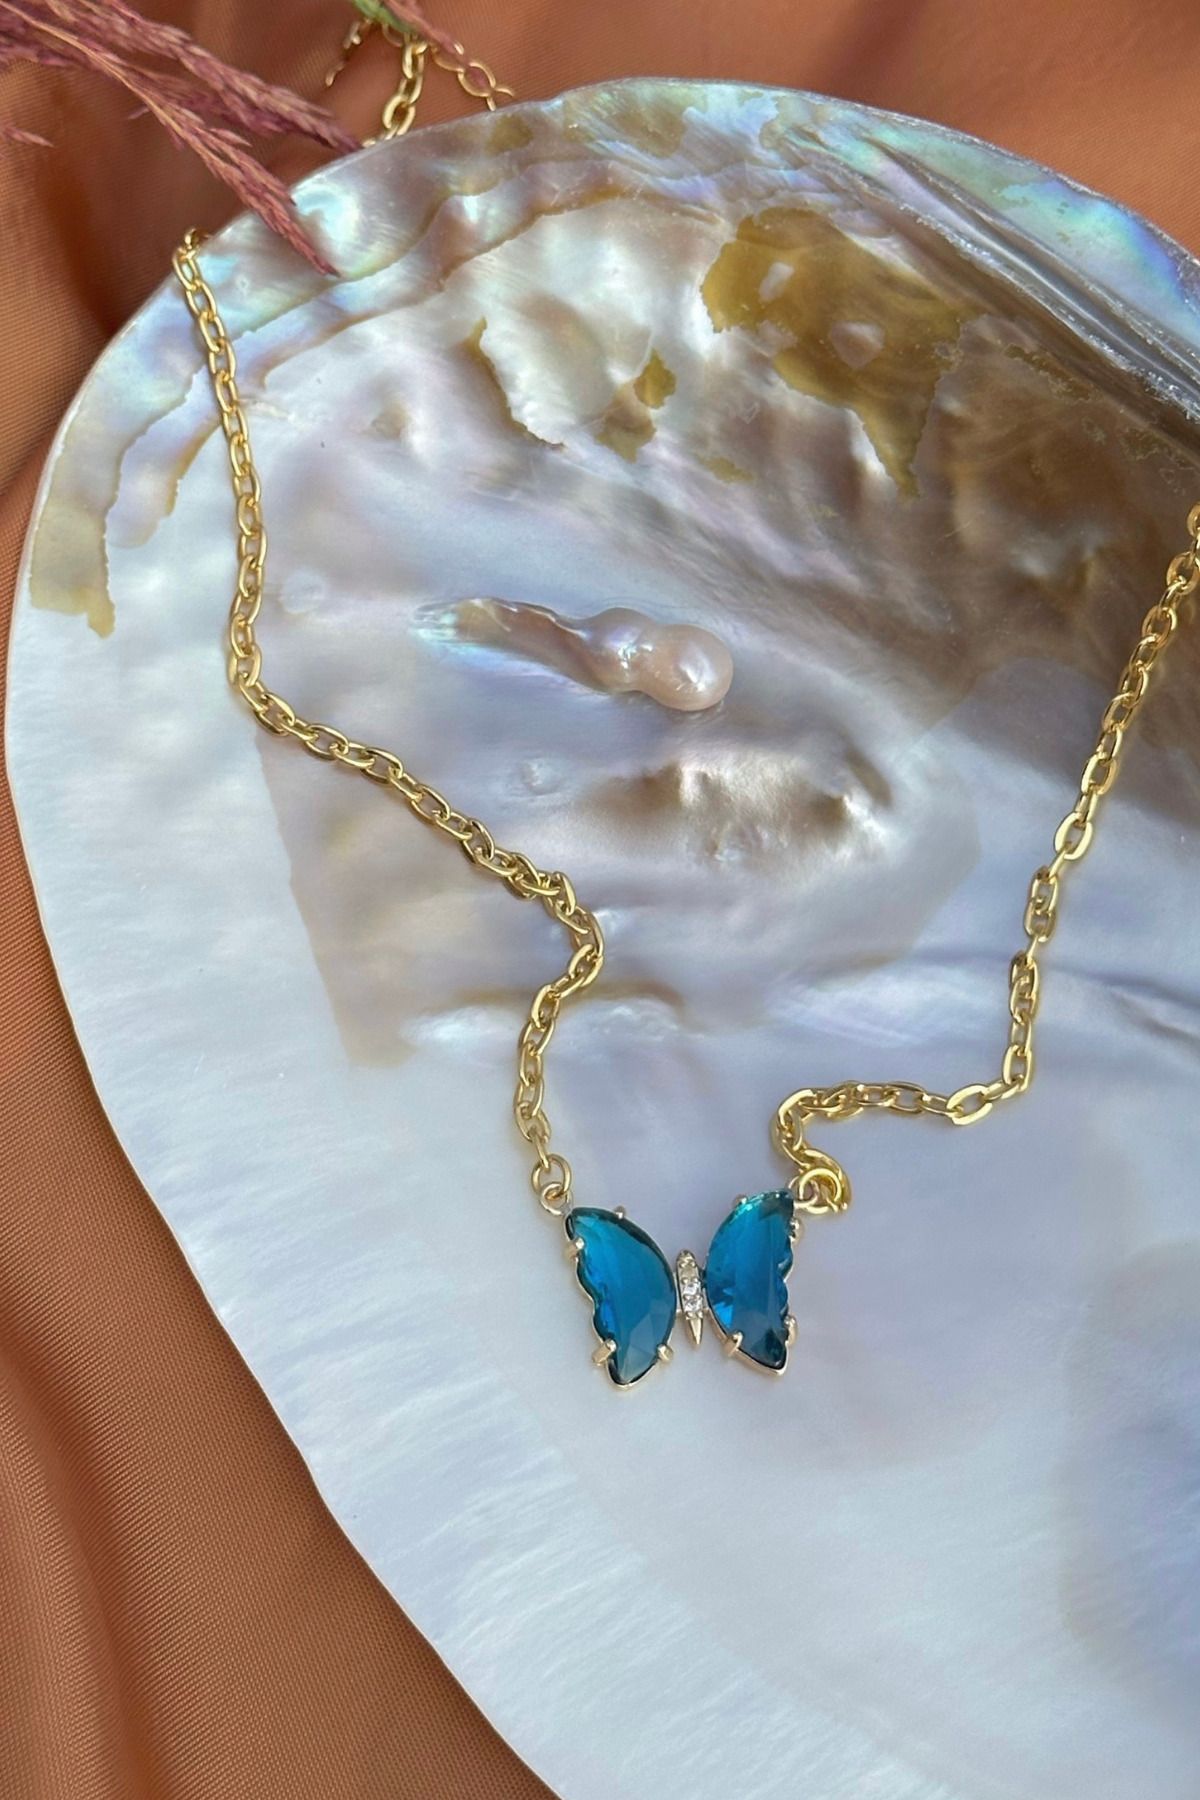 Vintage sighned avon butterfly necklace for Sale in St. Louis, MO - OfferUp